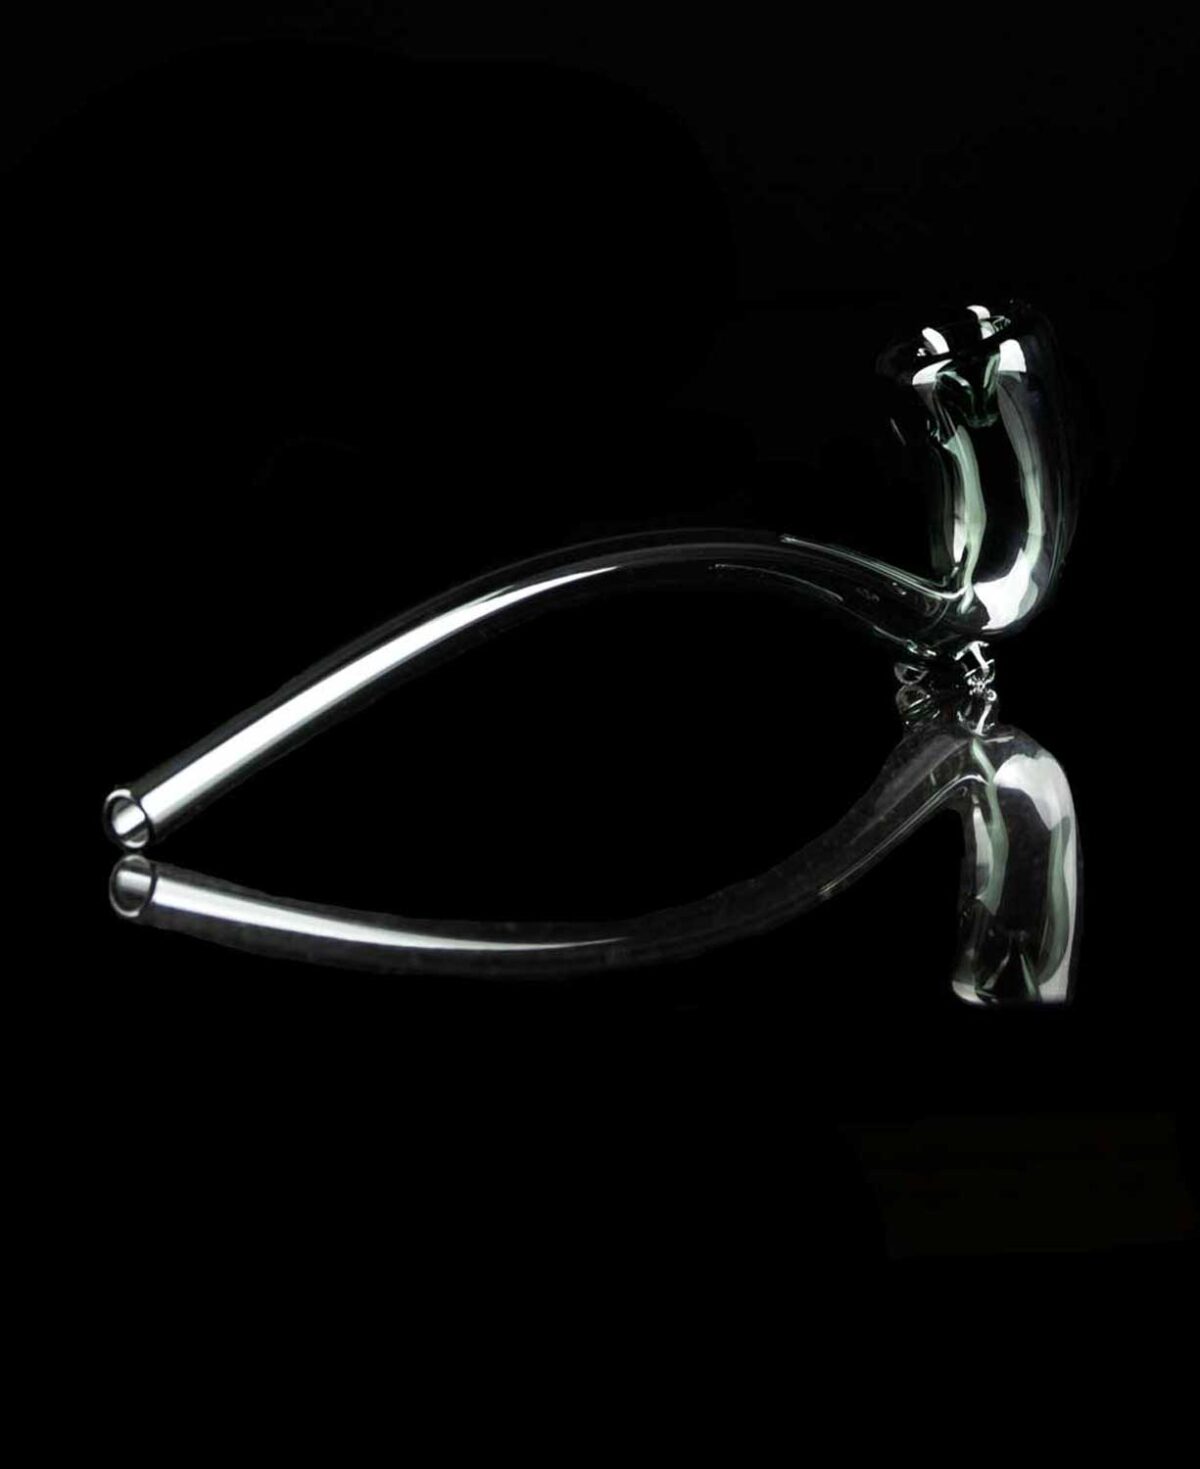 gandalf pipe made from black glass